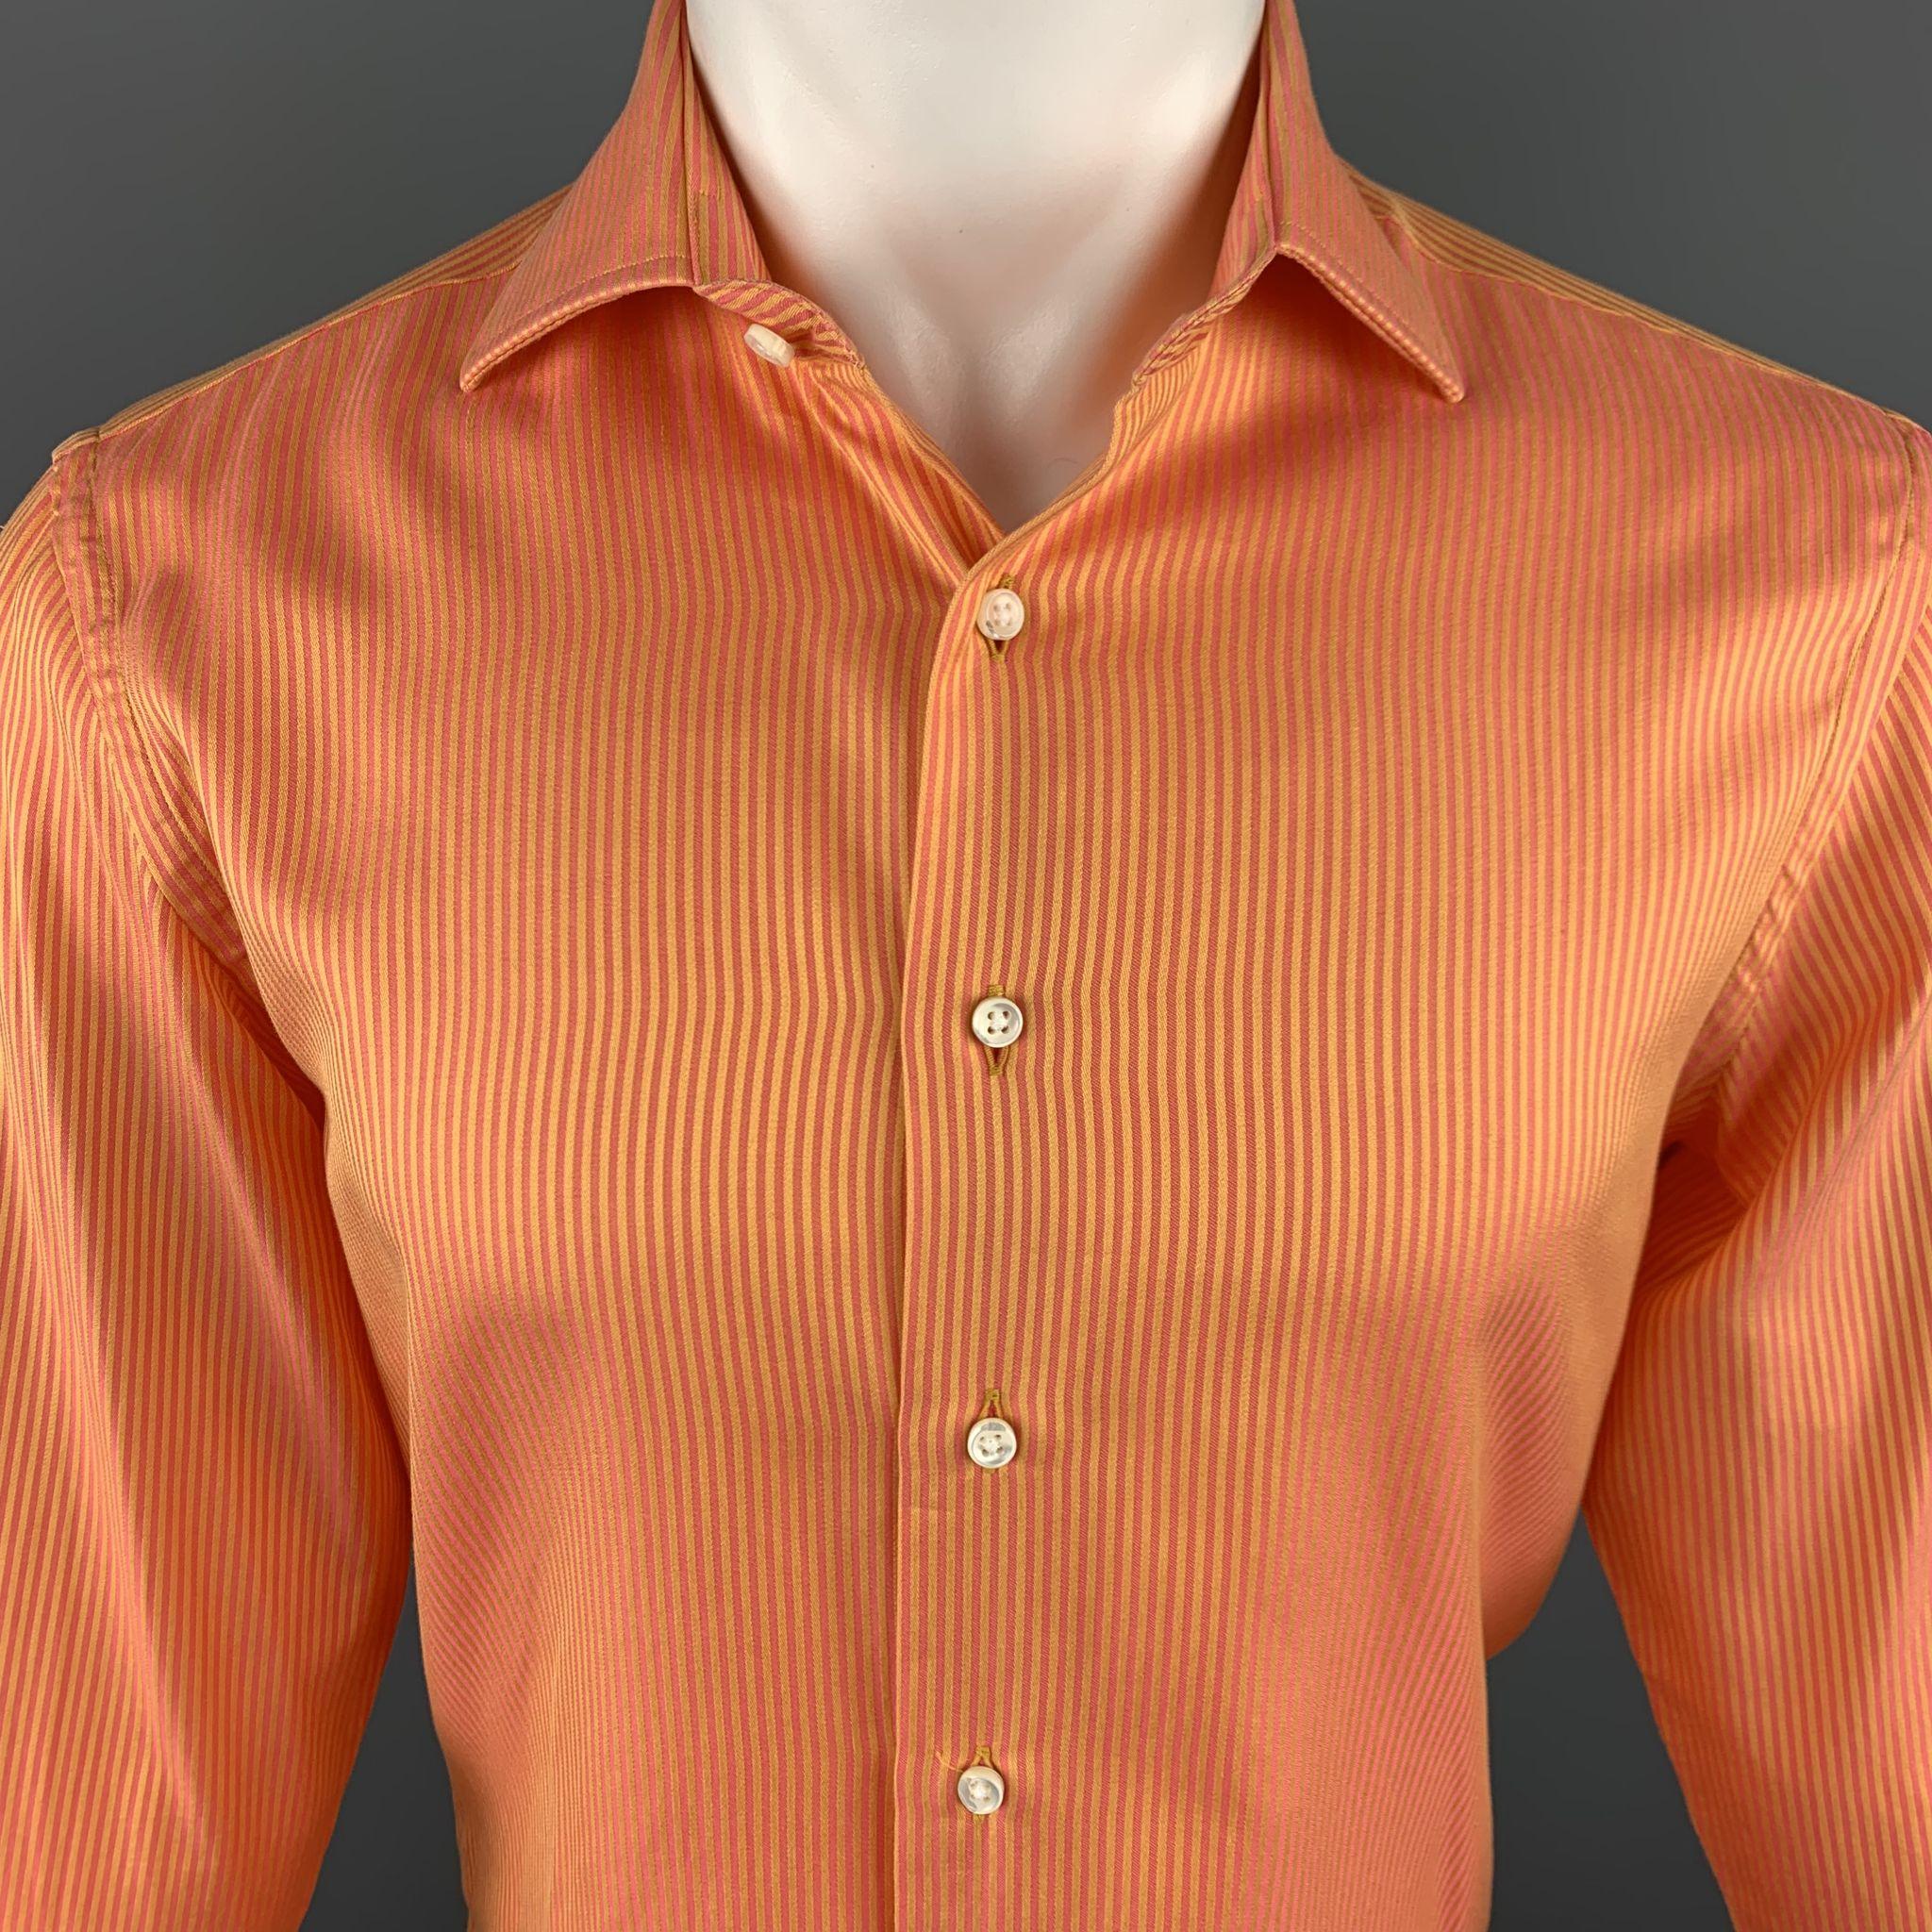 DUNCAN QUINN Long Sleeve Shirt comes in orange tones in a striped cotton material, with a spread collar, buttoned cuffs, button up. Made in Italy.
 
Excellent Pre-Owned Condition.
Marked: S
 
Measurements:
Shoulder: 16 in.
Chest: 41 in.
Sleeve: 26